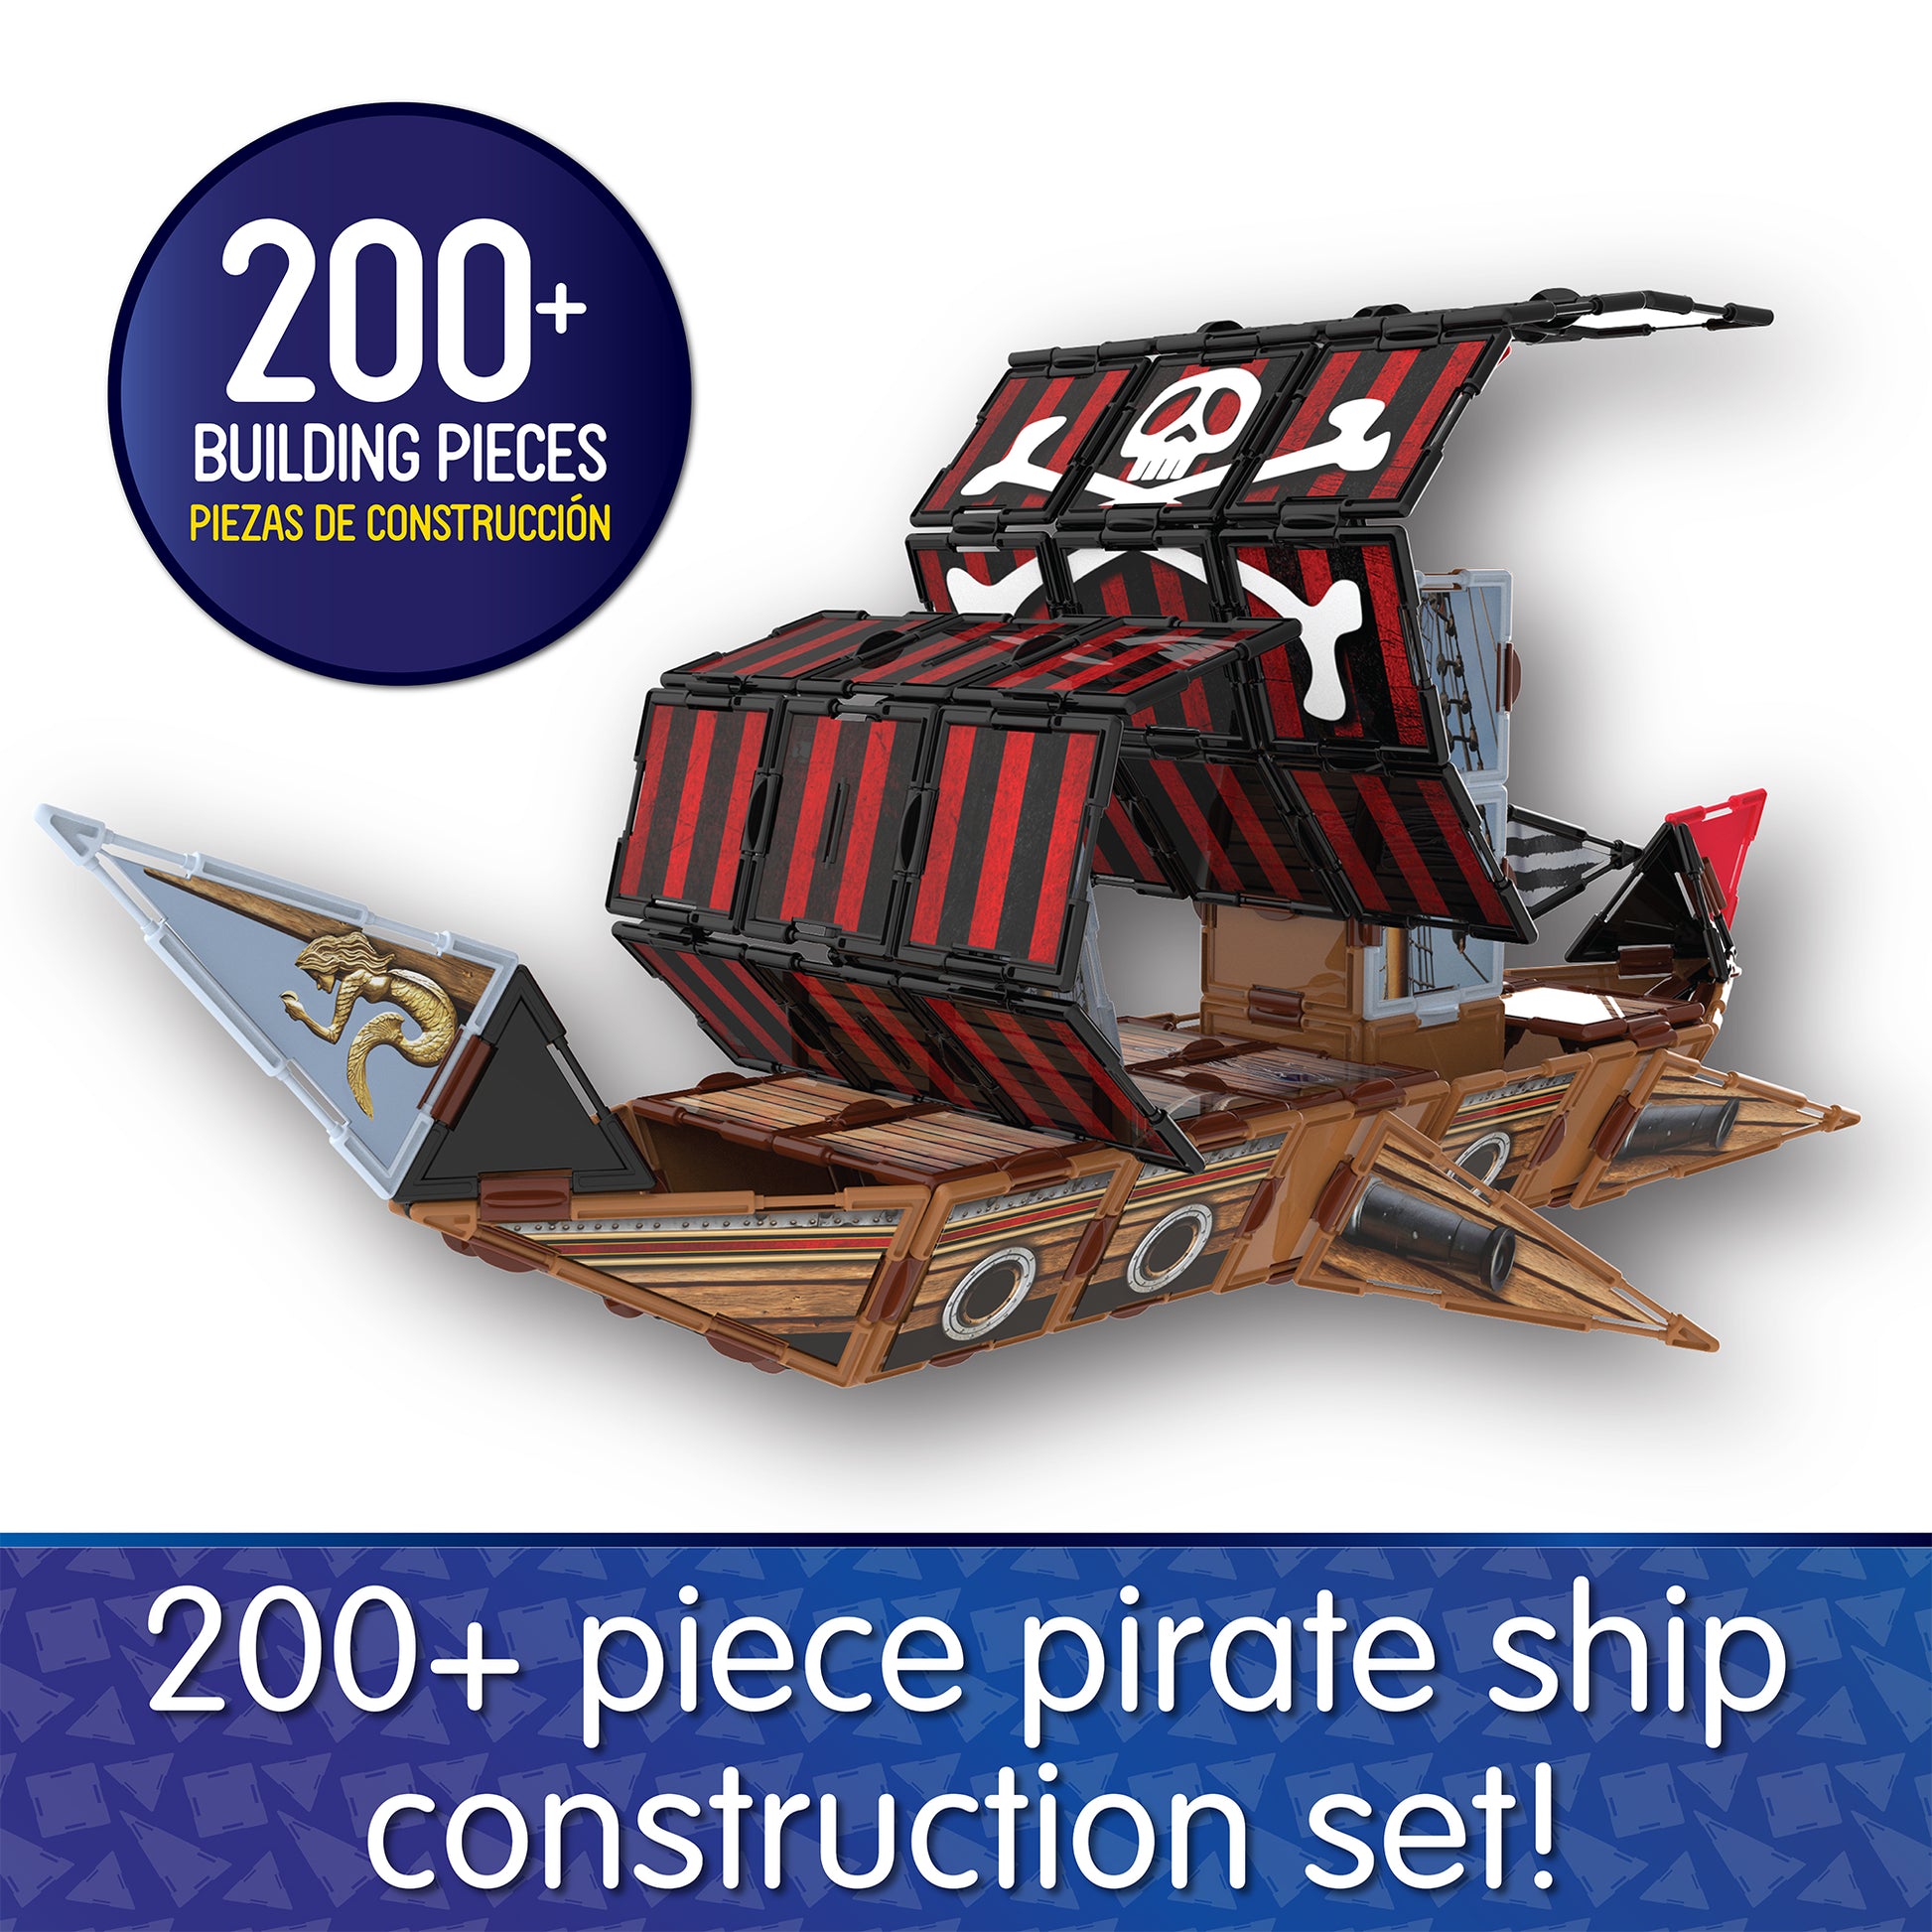 Infographic about Pirate Ship's features